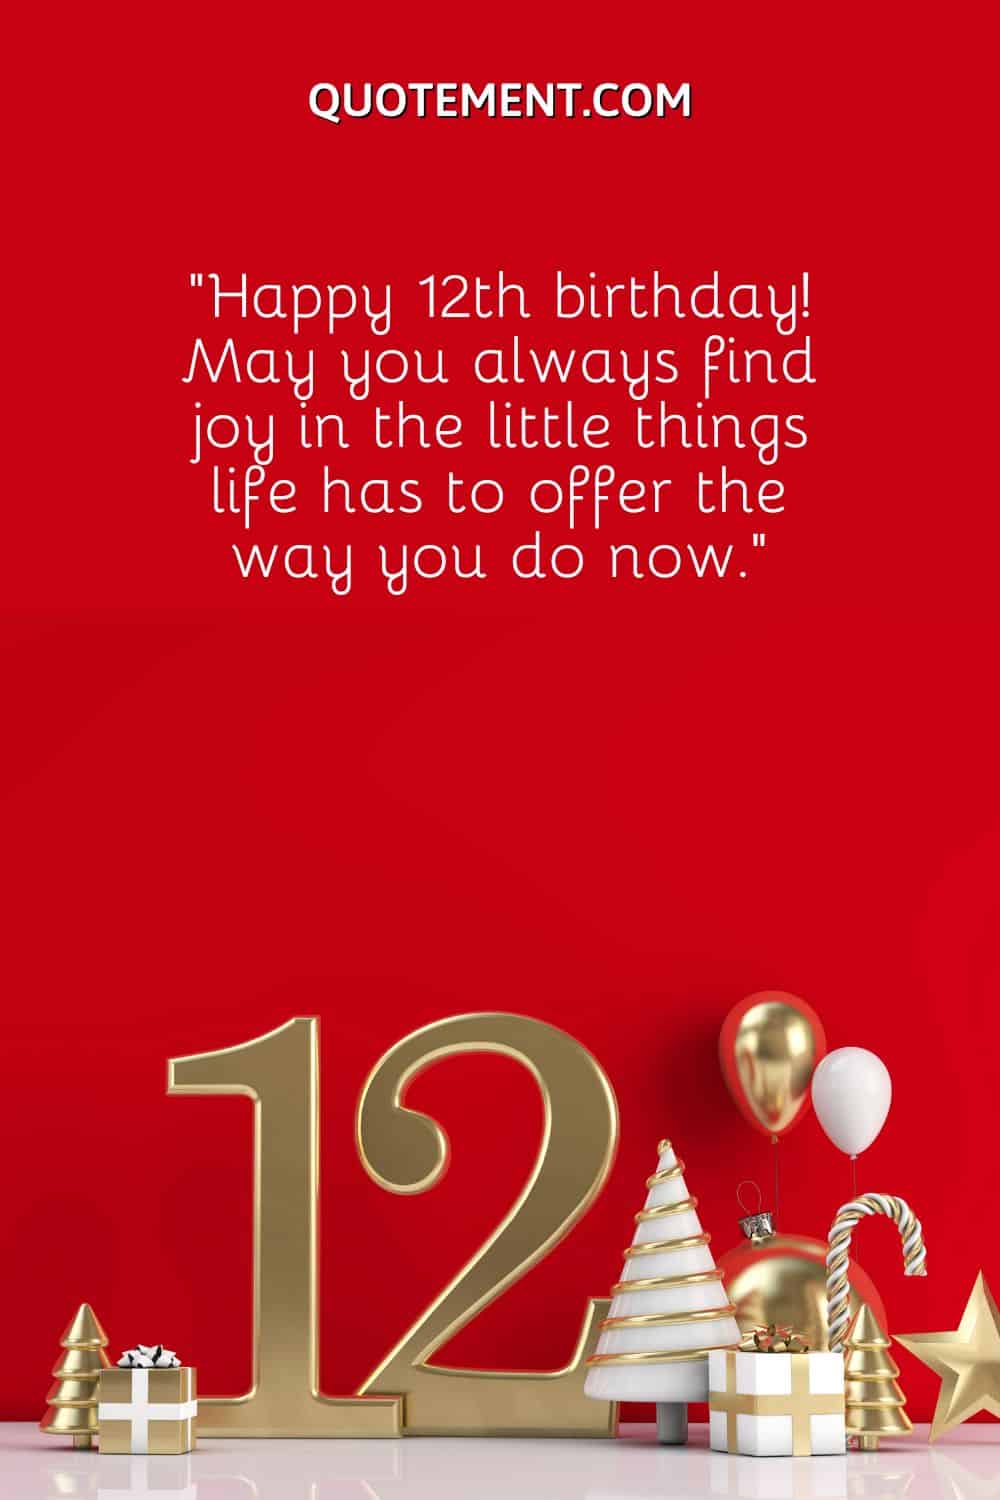 “Happy 12th birthday! May you always find joy in the little things life has to offer the way you do now.”.